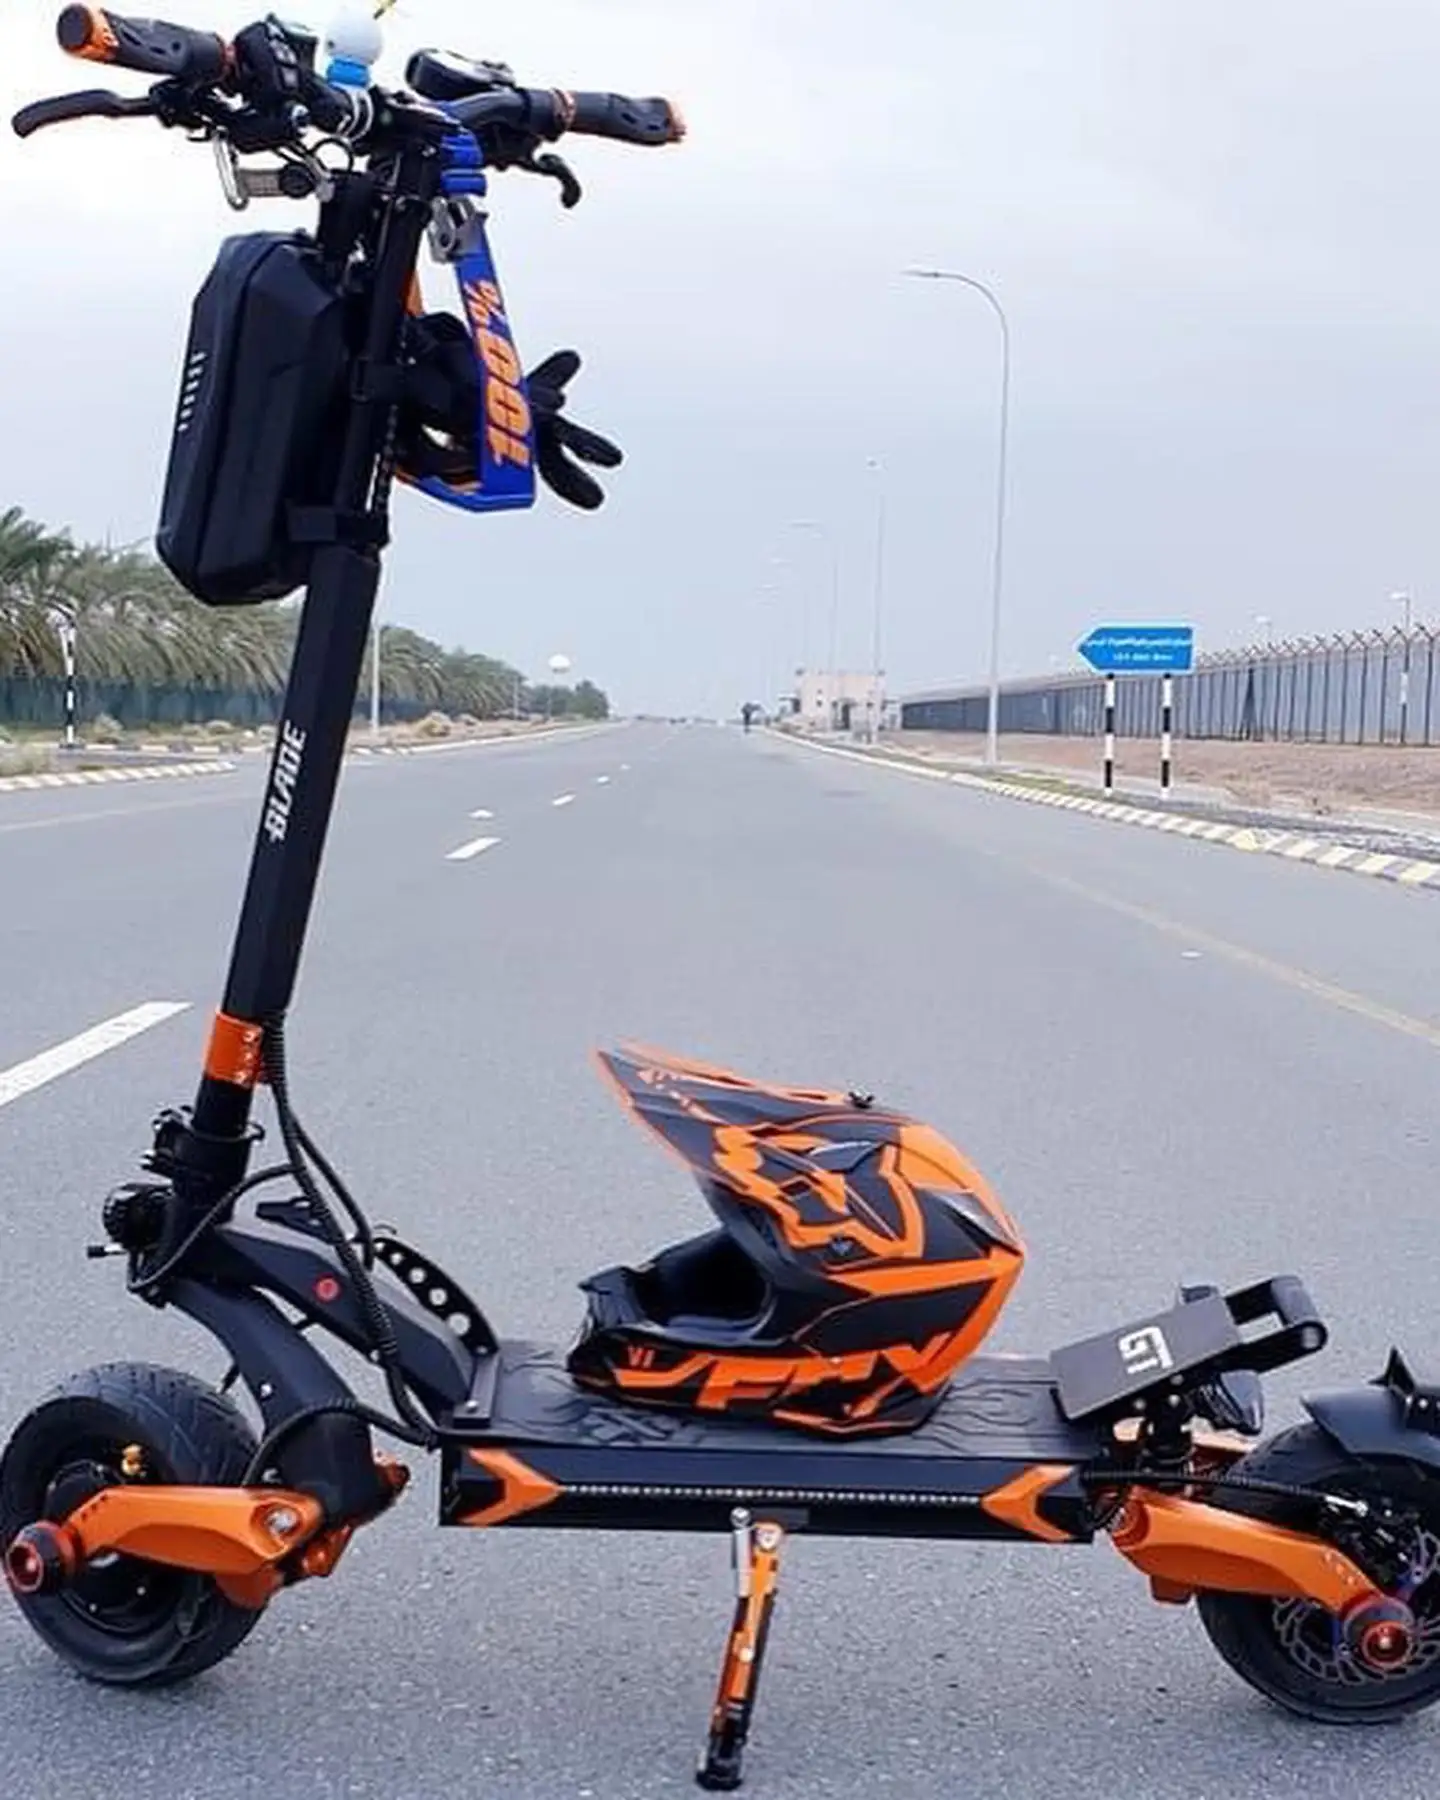 

2022 blade GT 3000W dual motor full hydraulic brake TFT display and throttle screen electric scooter, Orange and black